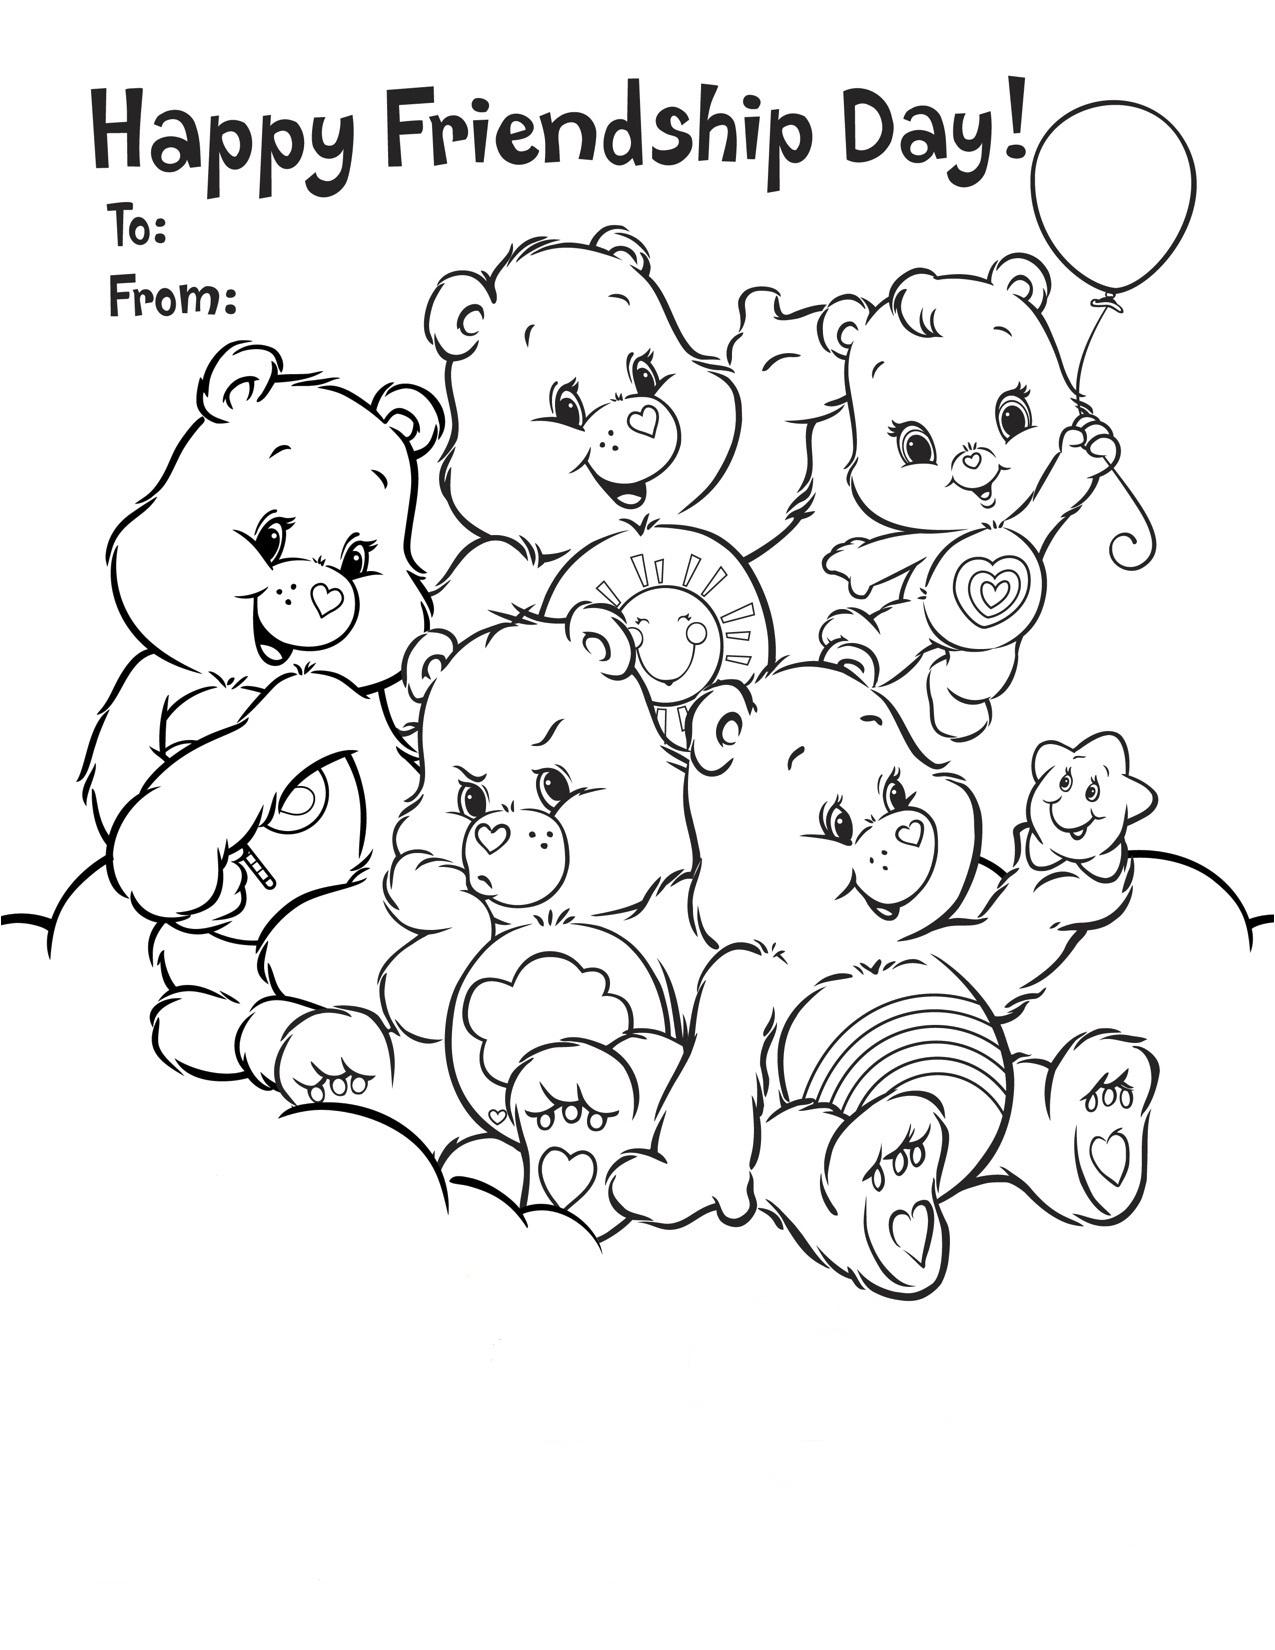 Best Friends Coloring Pages Printable at Free